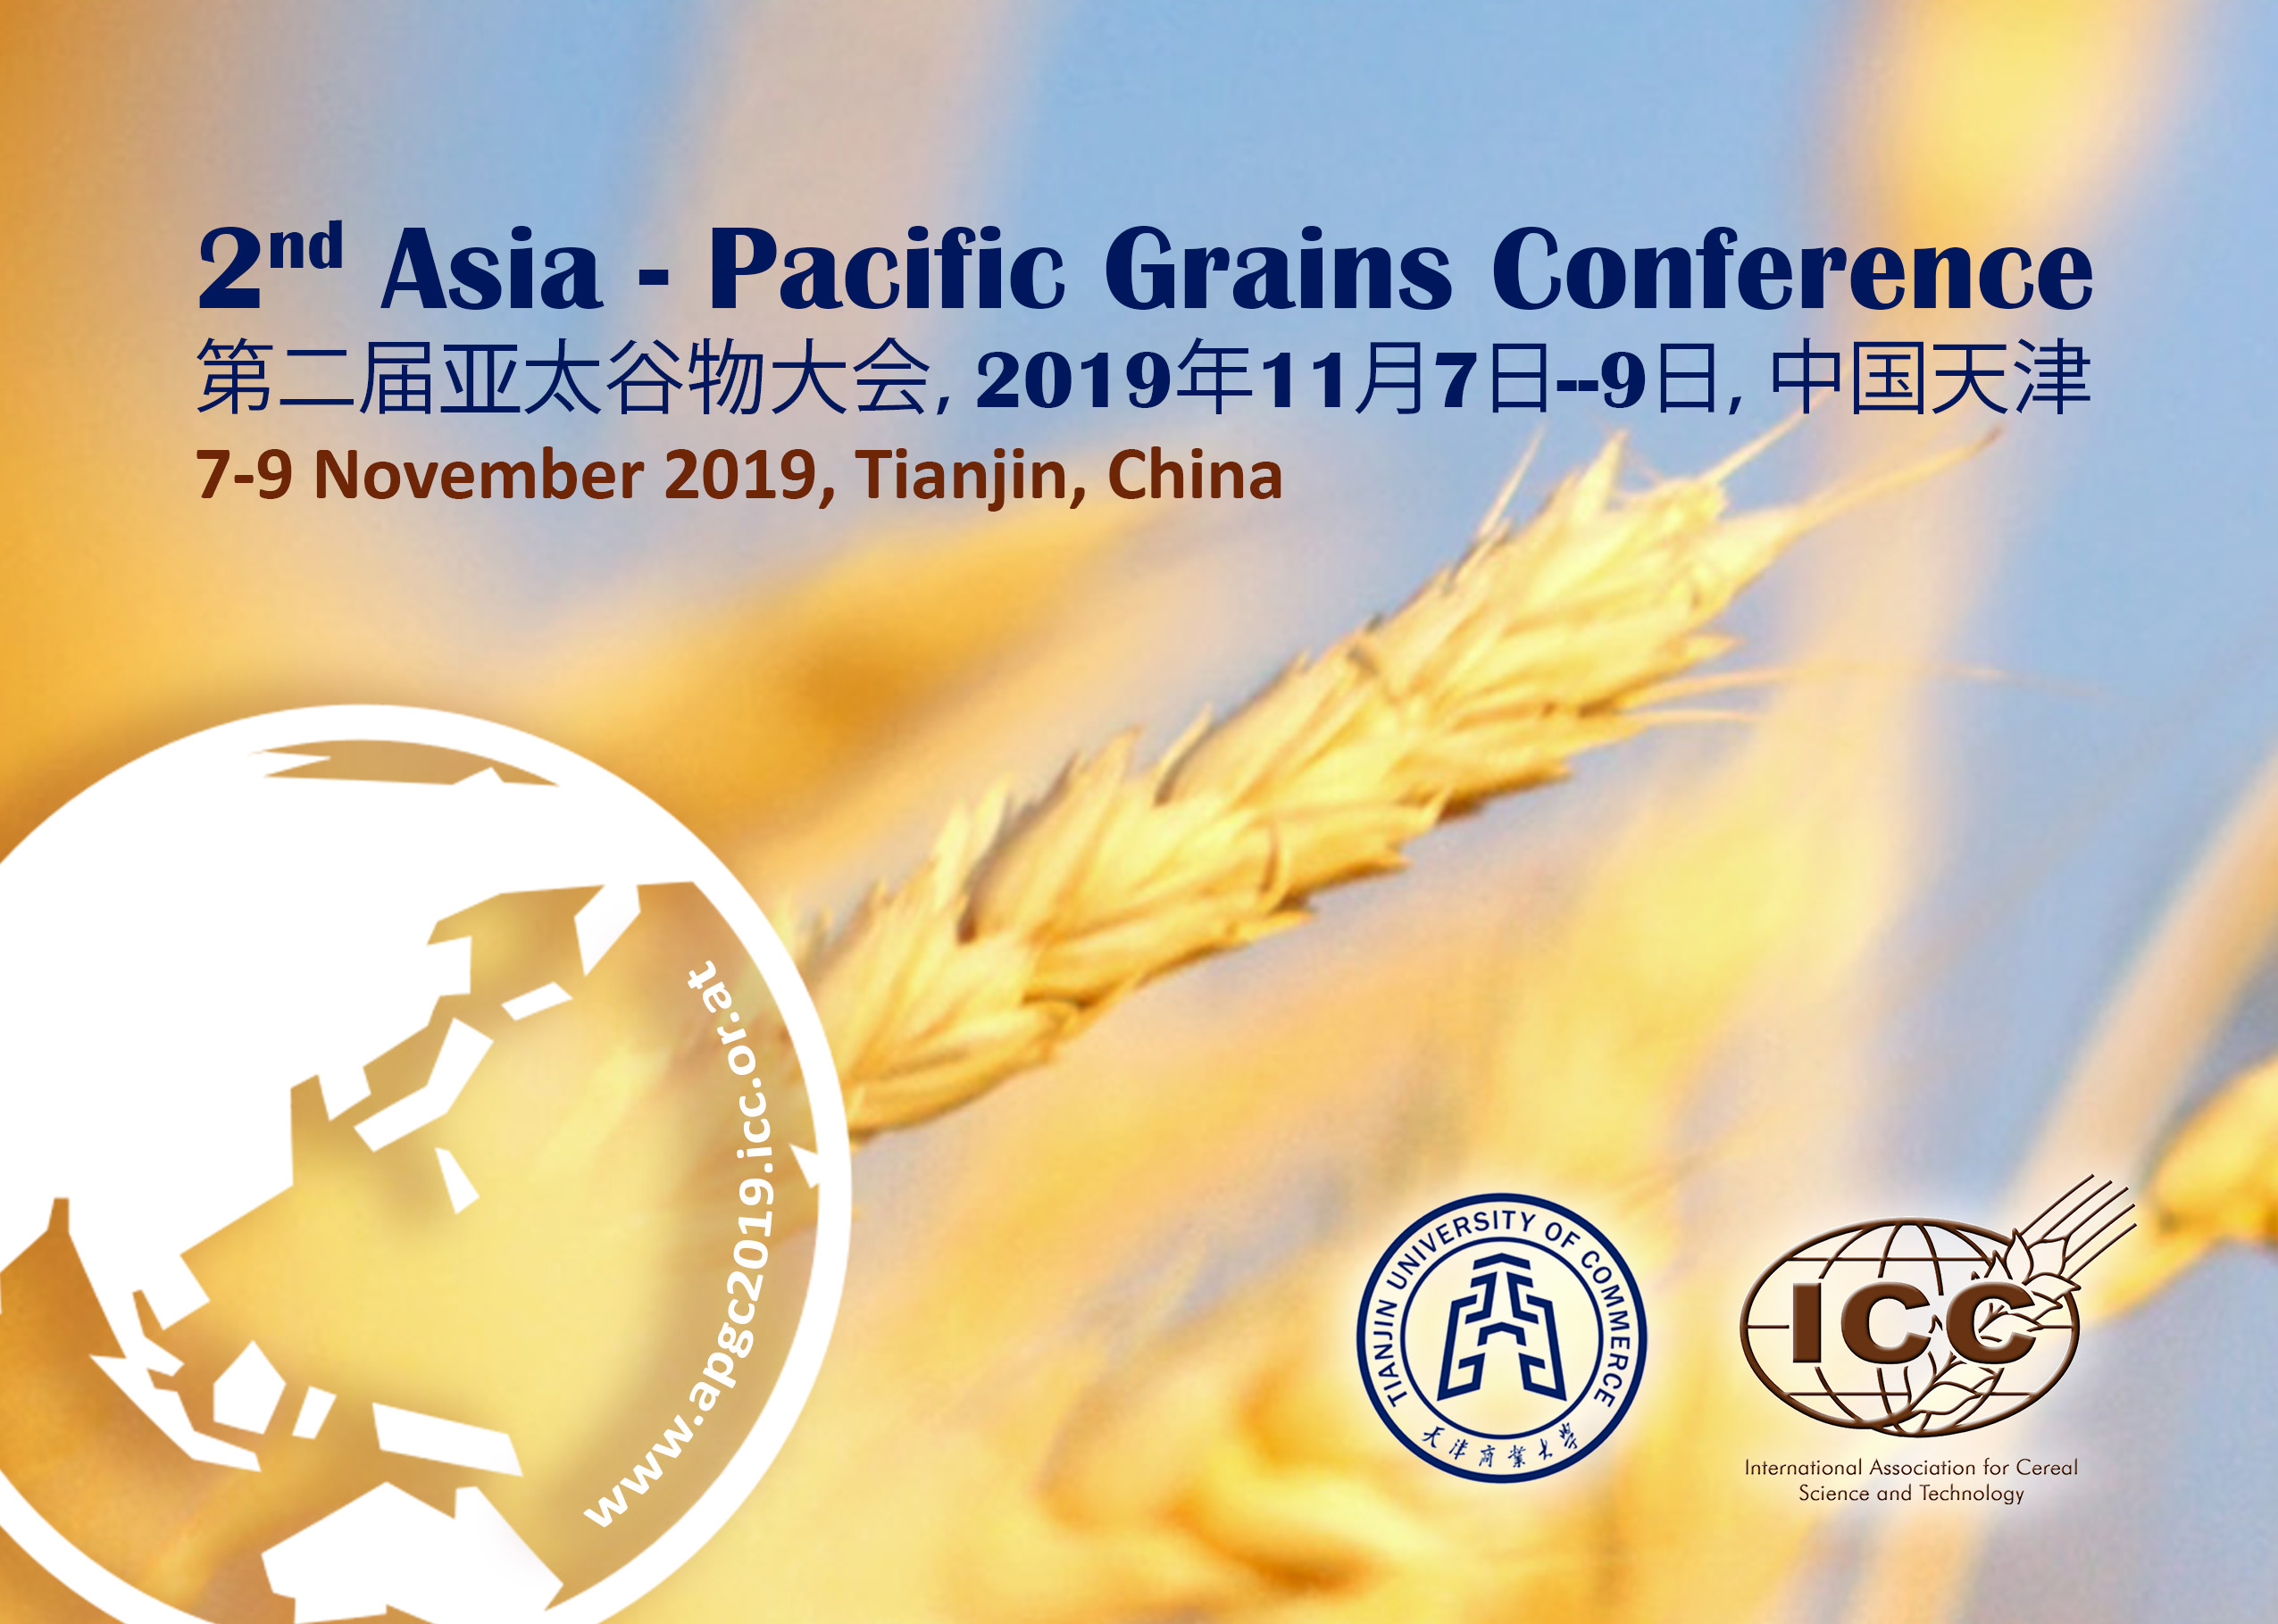 2nd Asia-Pacific Grains Conference - Save the date!